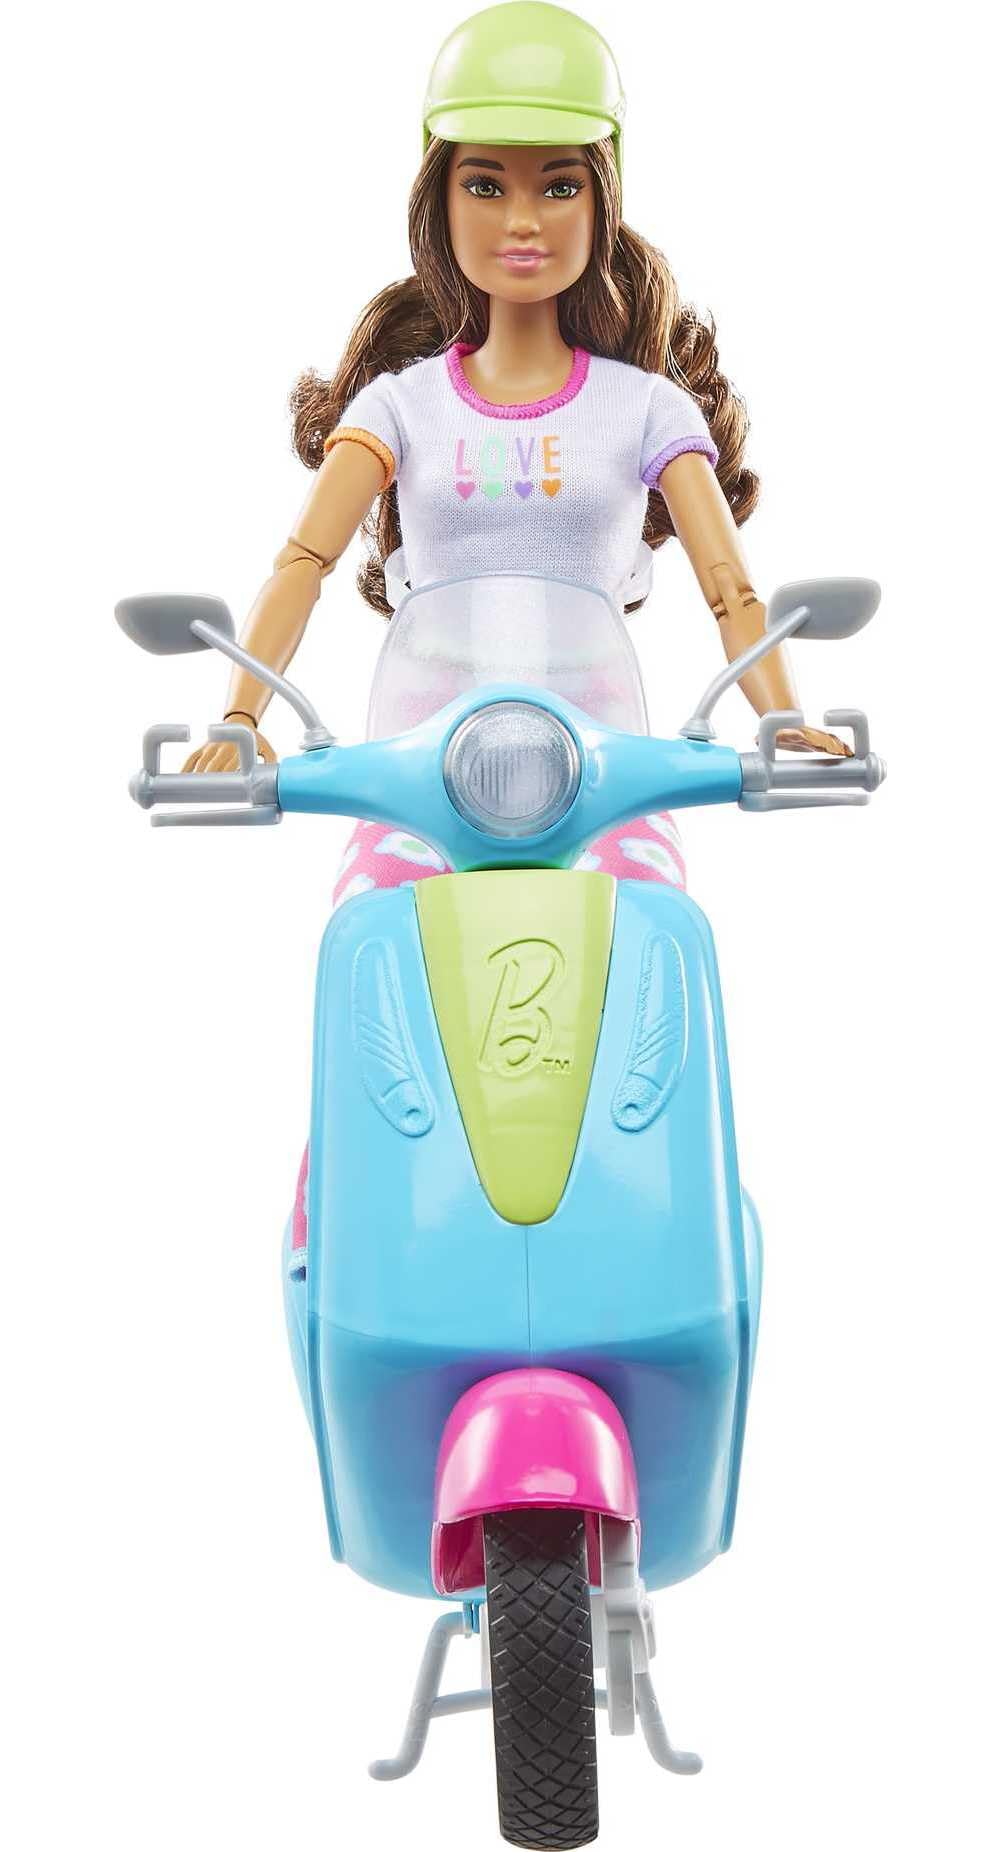 Barbie Fashionistas Doll and Scooter, Travel Playset with Stickers, Pet Puppy and Themed Accessories like Map and Camera (Amazon Exclusive)